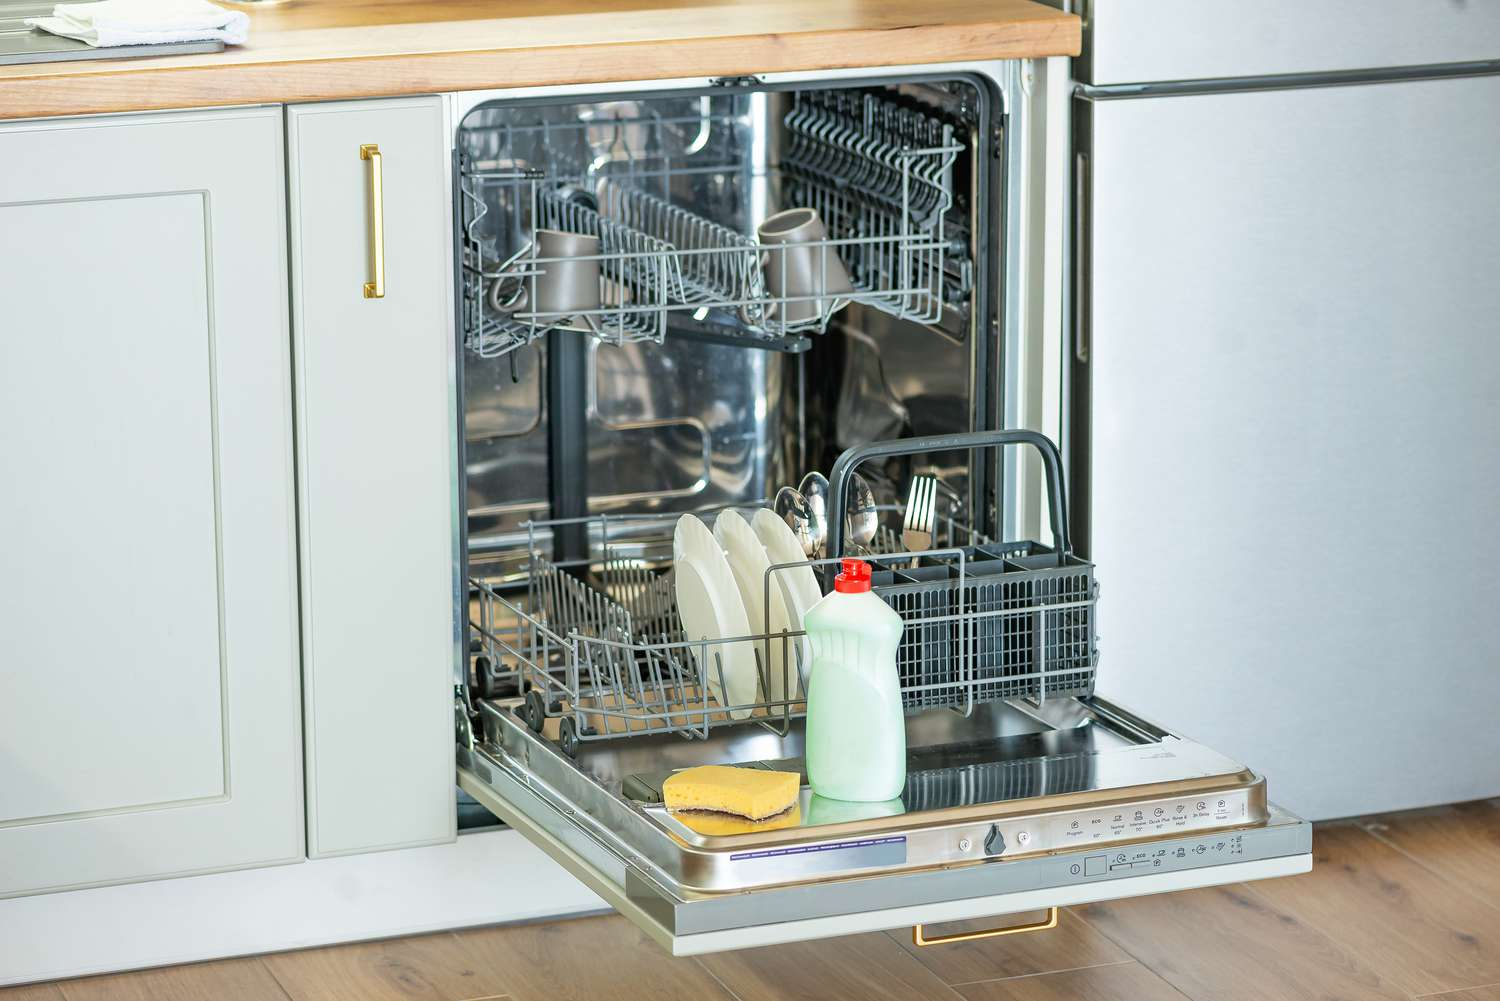 Keep your dishwasher sparkling clean!